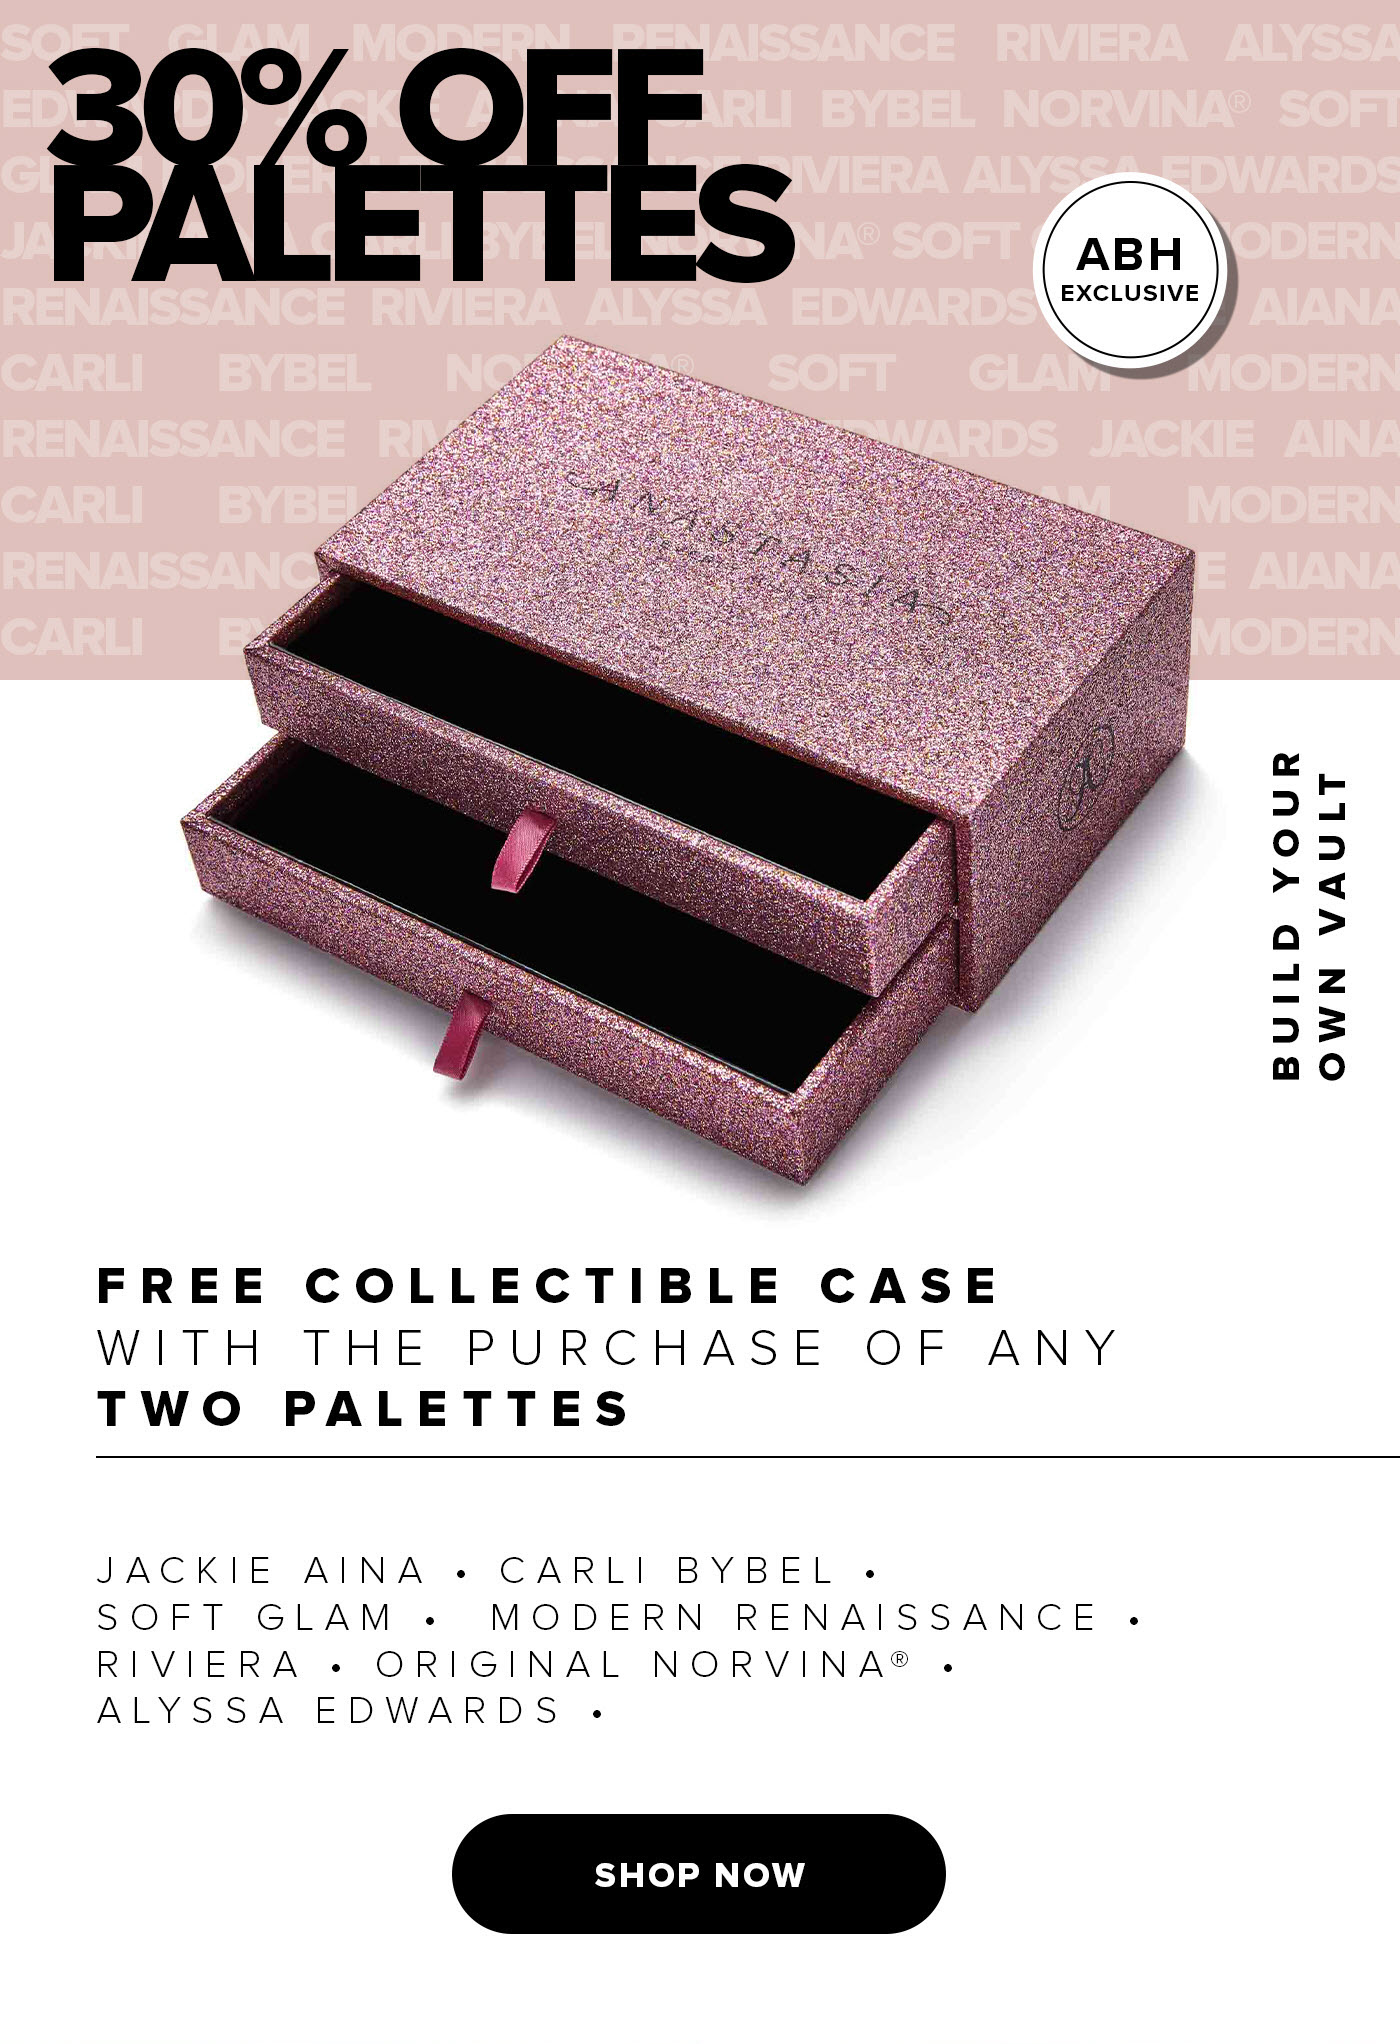 Choose 2 Palettes, Get 30% Off & Collectible Case